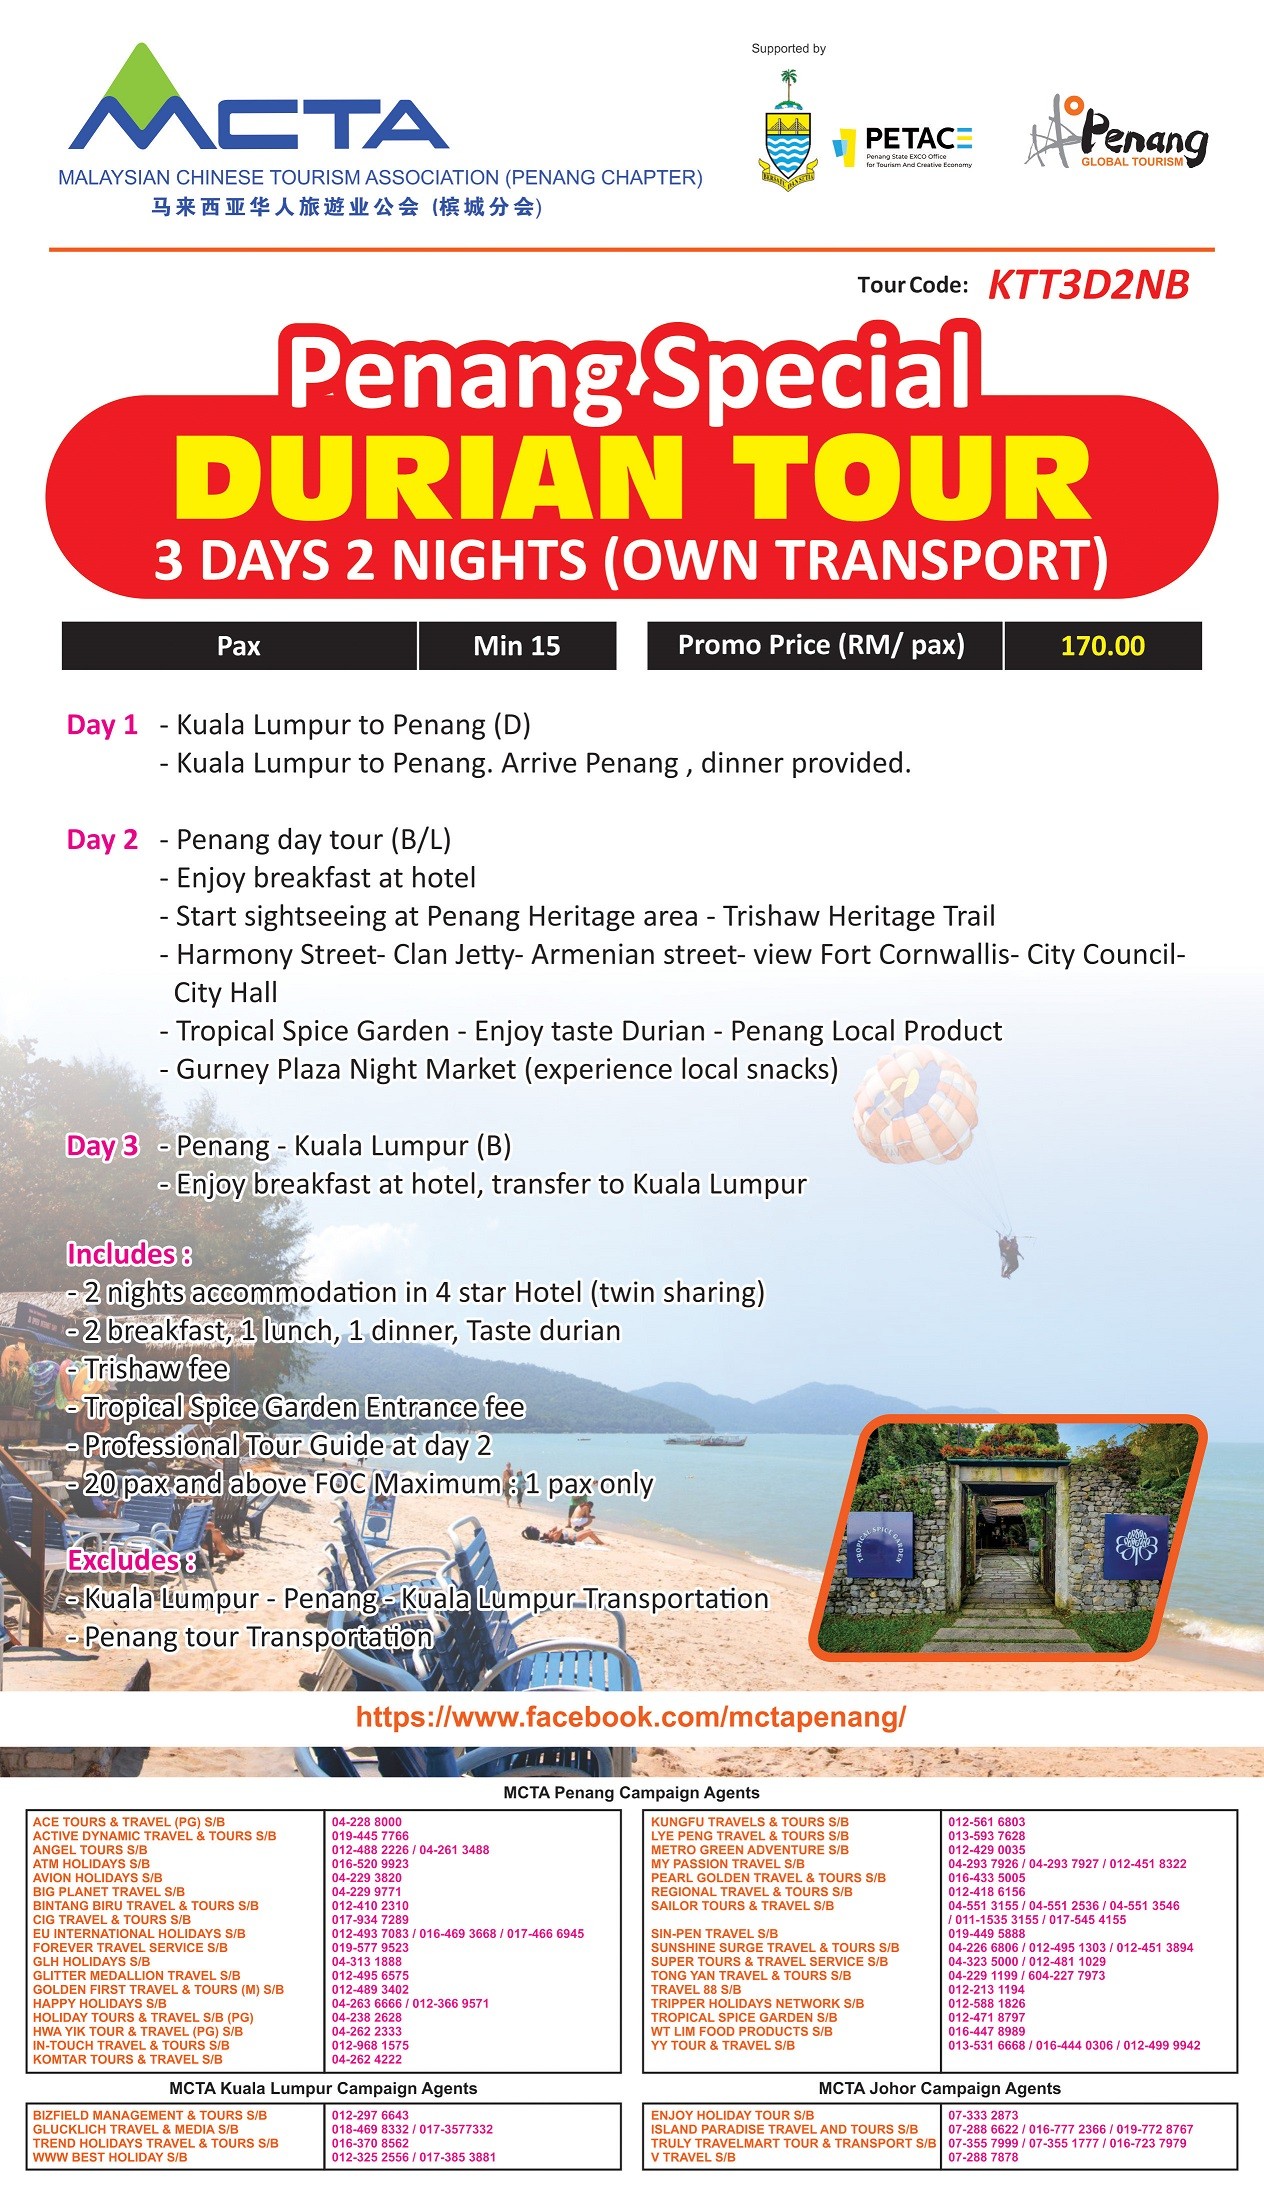 Penang Special Durian Tour - 3 Days 2 Nights (Own Transport)